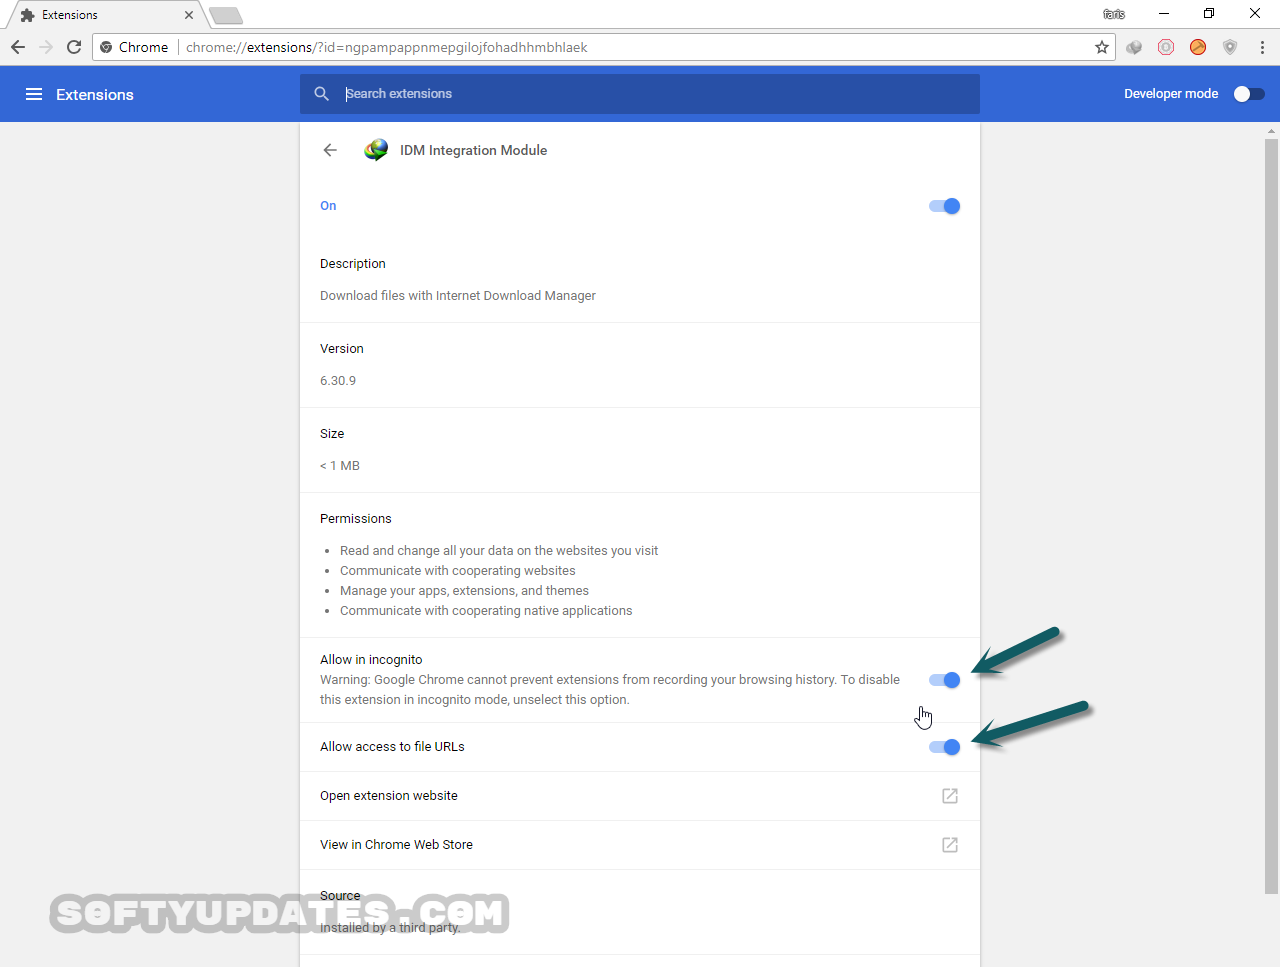 Download Facebook Videos & YouTube By Internet Download Manager (IDM) Download Bar